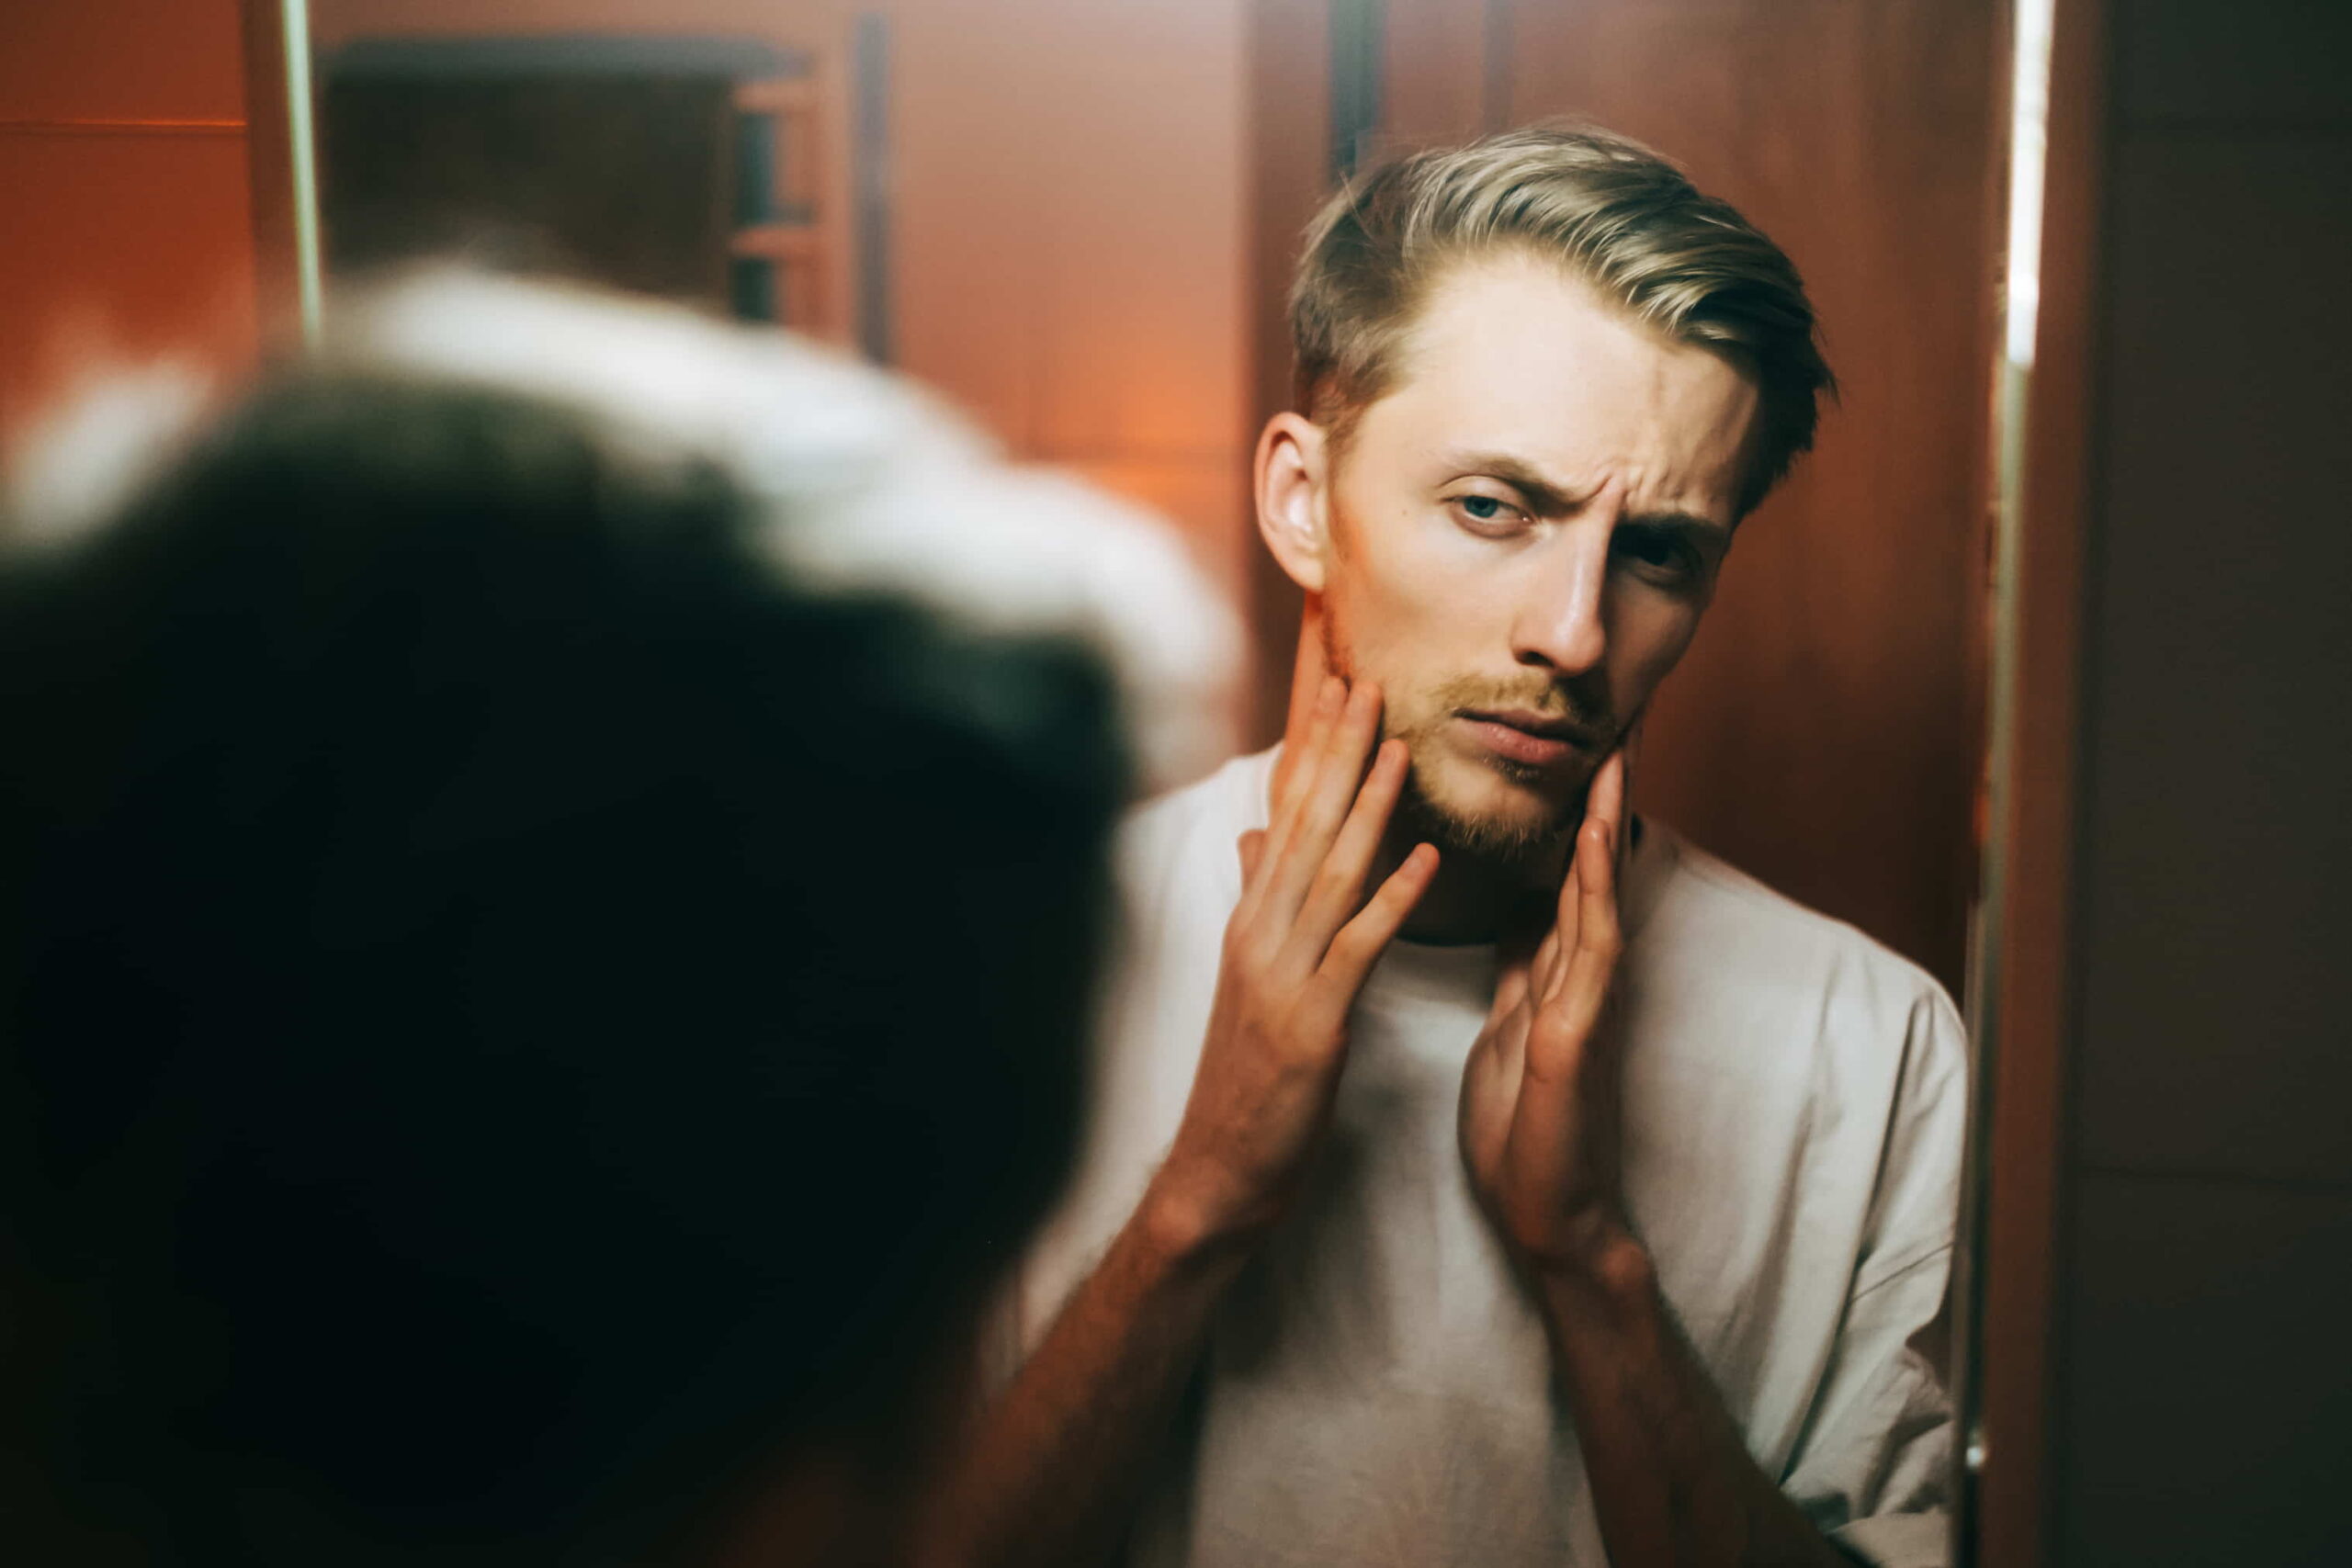 Text: A man standing in front of the mirror, touching his face and analyzing its shape.